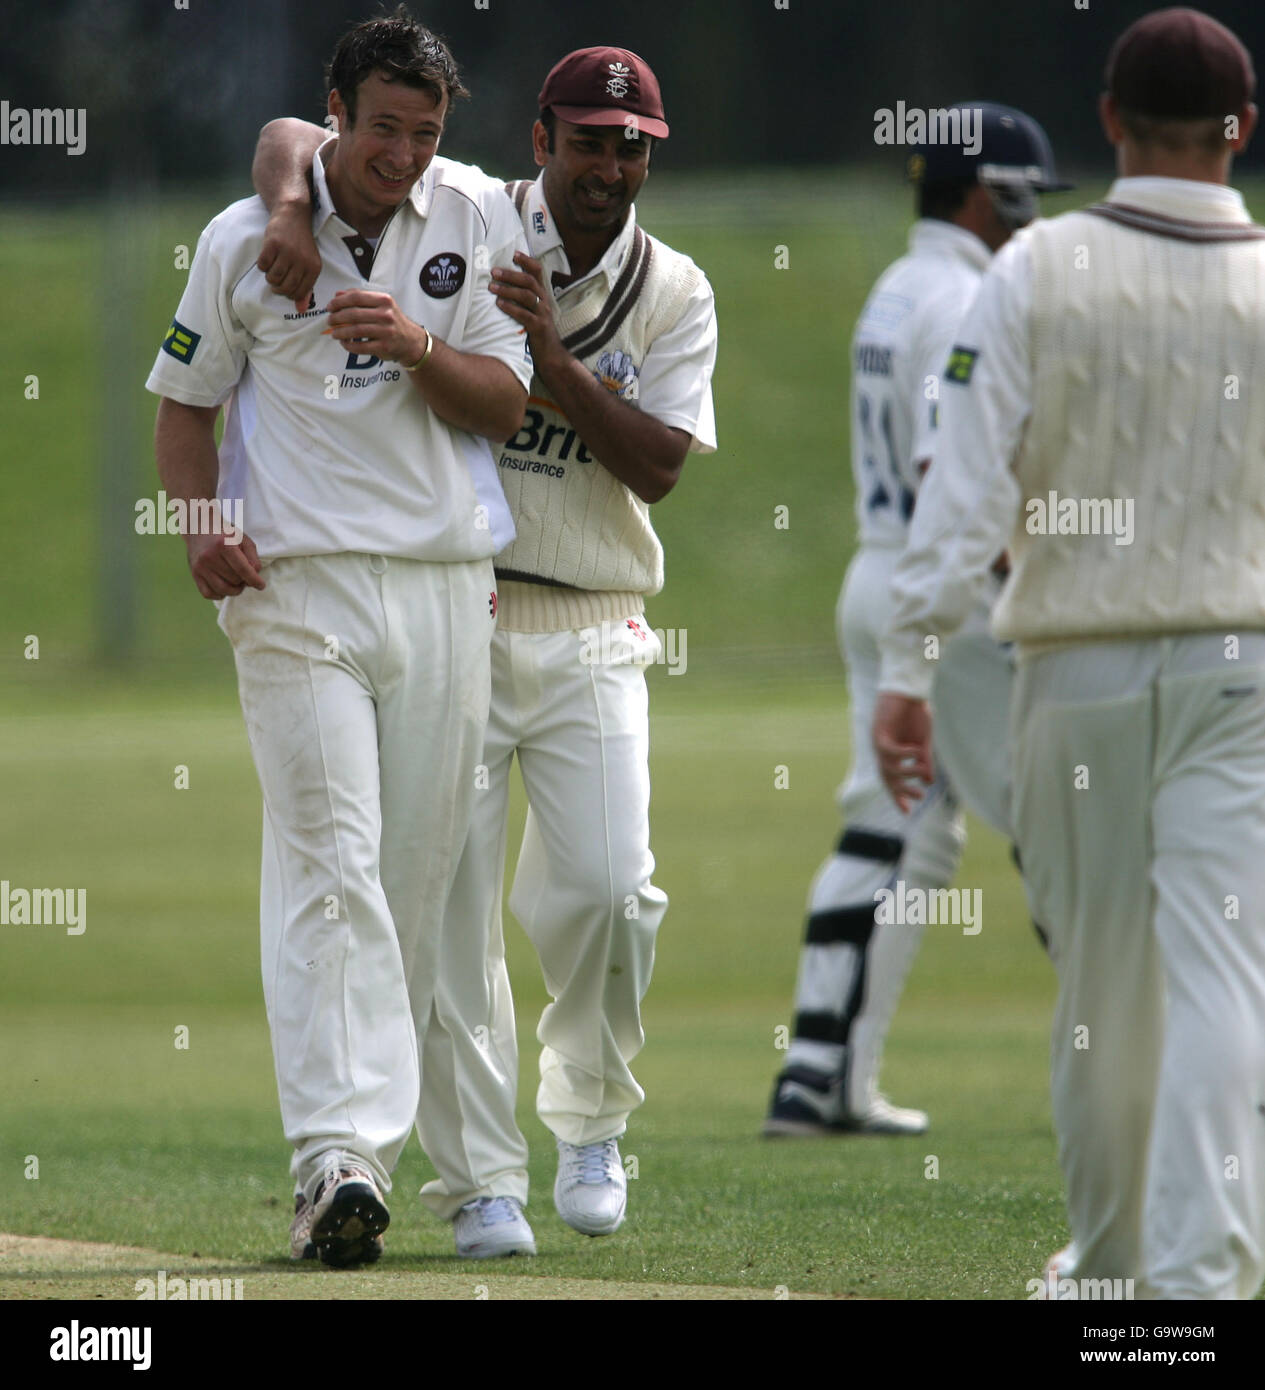 Surrey's bowler Richard Clinton celebrates taking his second wicket with coach Nadeem Shahid Stock Photo